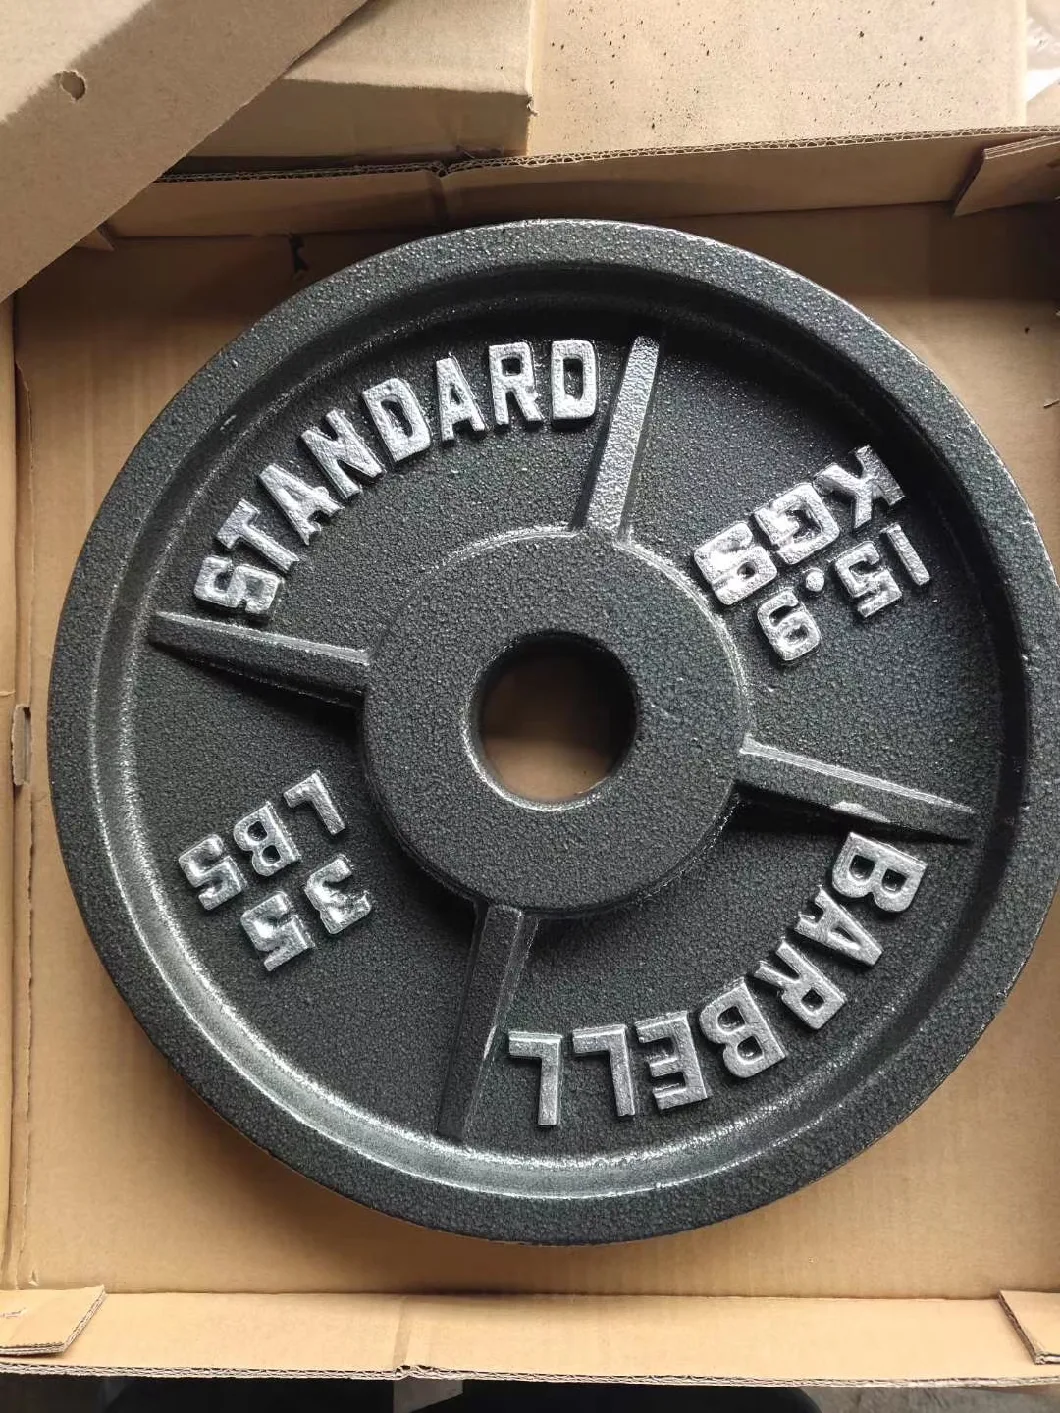 OEM Logo 2.5kg 10kg 30kg 35 Lbs Ductile Gray Cast Iron Black Body Building Weight Plates for Home Gym Fitness Equipment Dumbbell Set